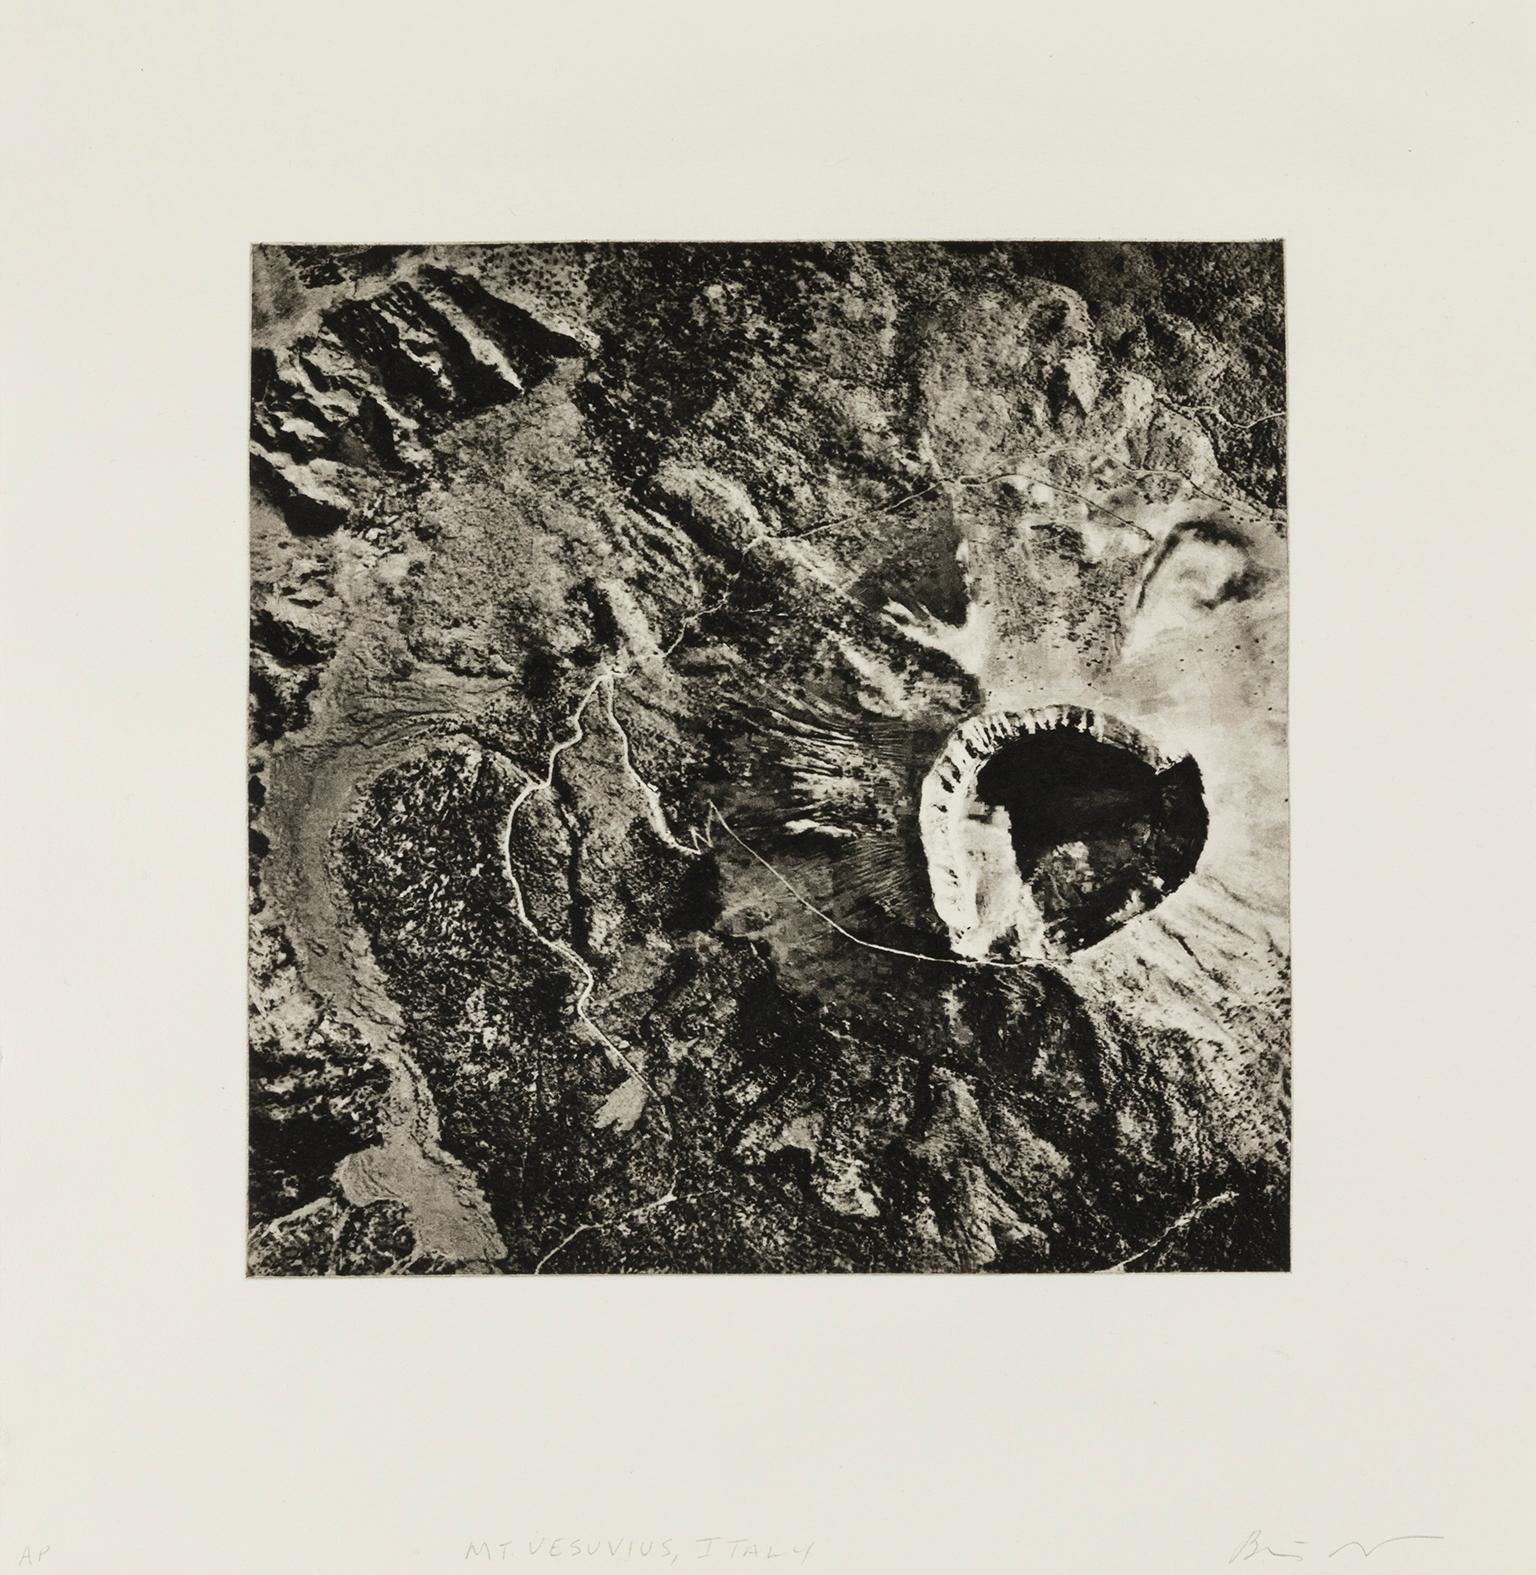 Beth Ganz Landscape Print - 'Mount Vesuvius, Italy' — from the series 'Axis Mundi', Contemporary